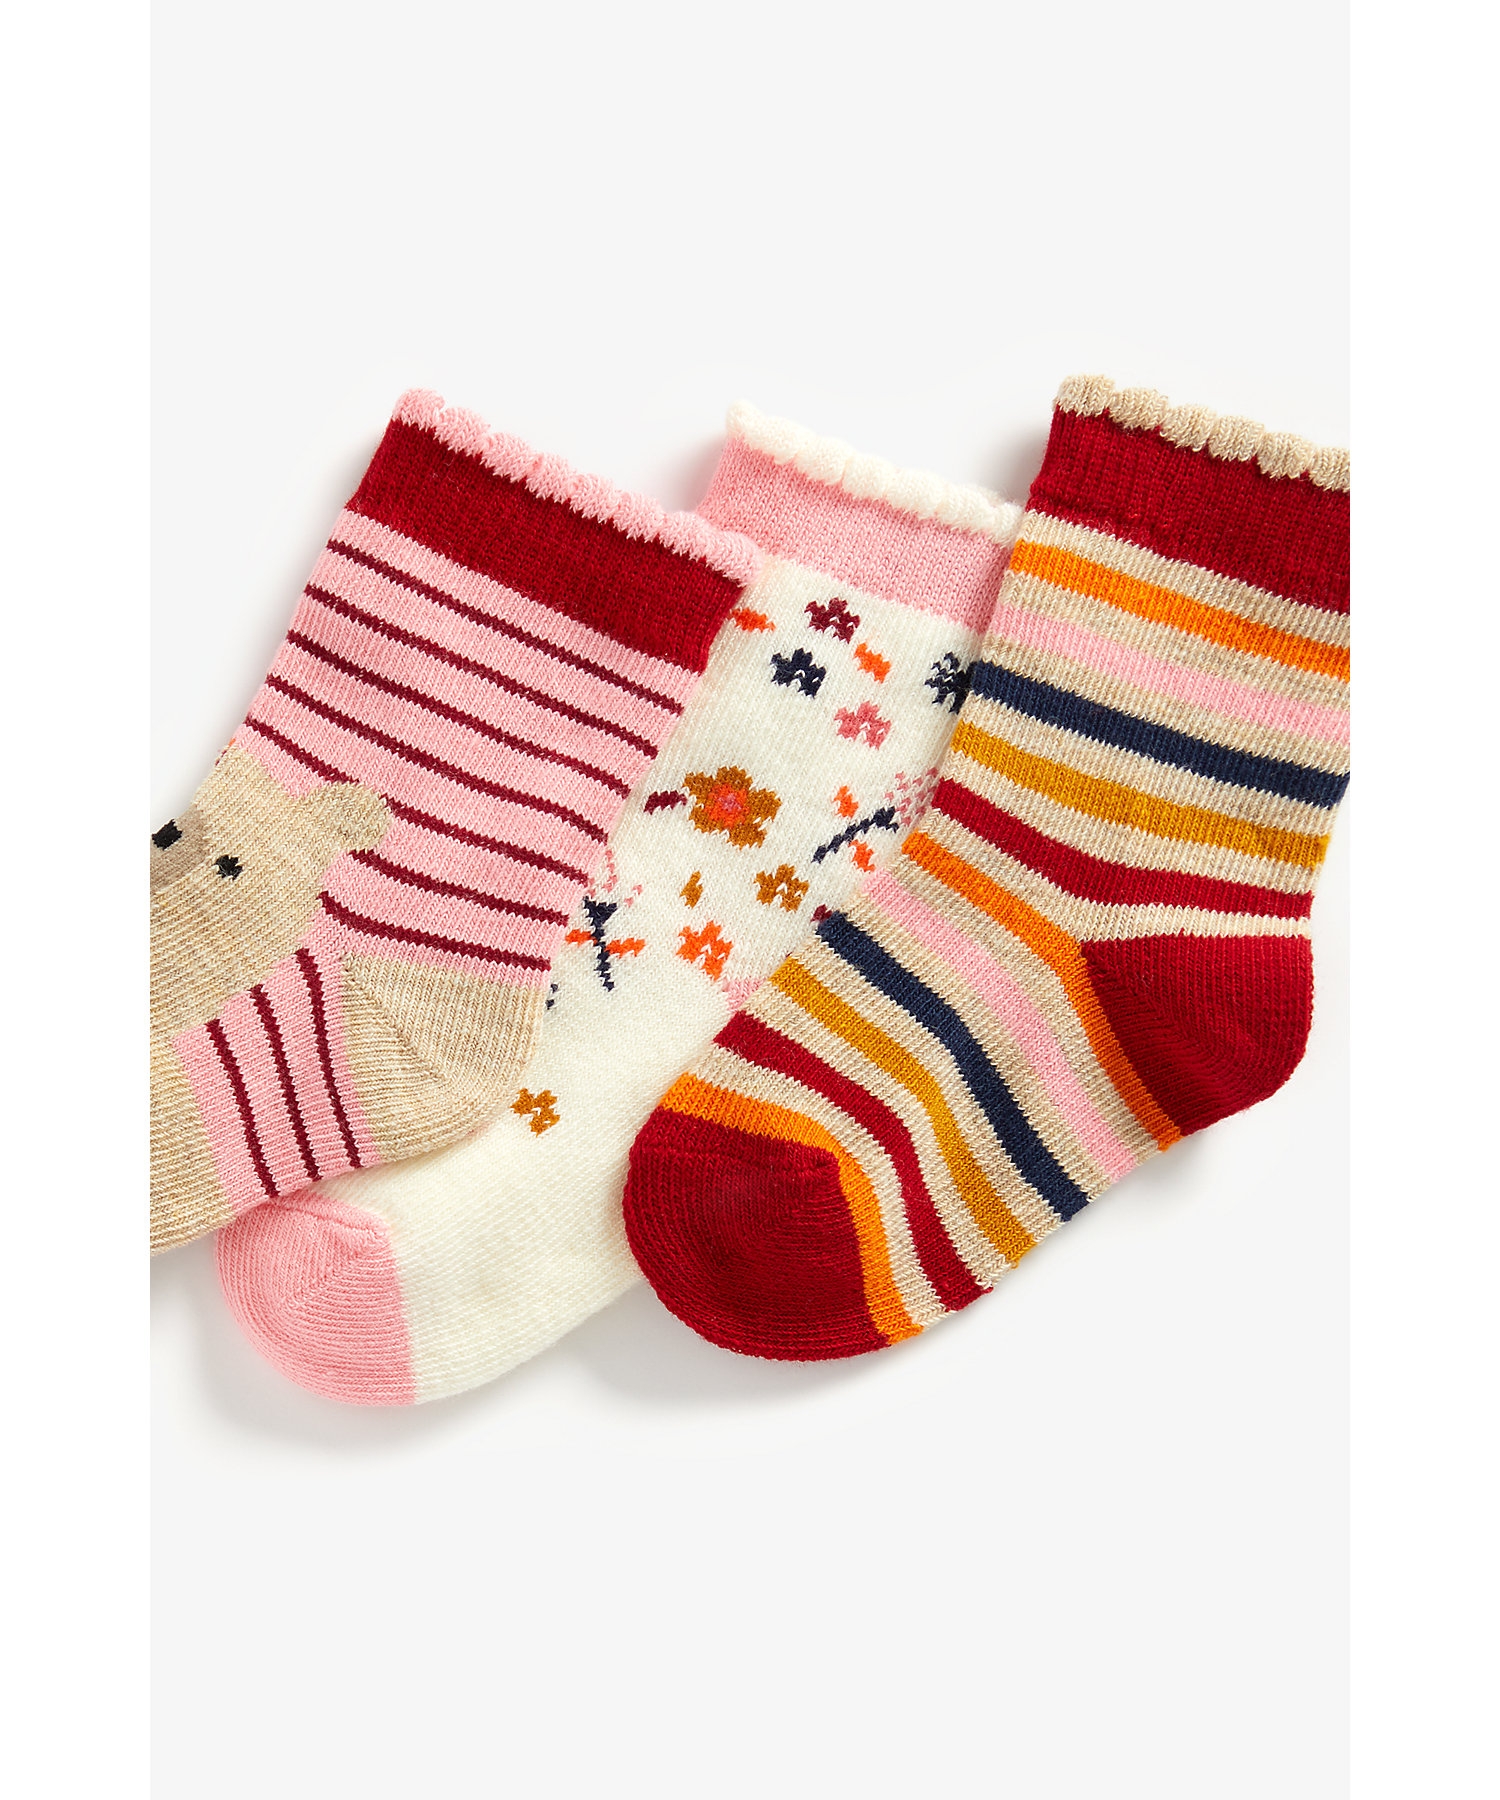 Mothercare | Girls Socks Striped And Floral Design - Pack Of 3 - Multicolor 1